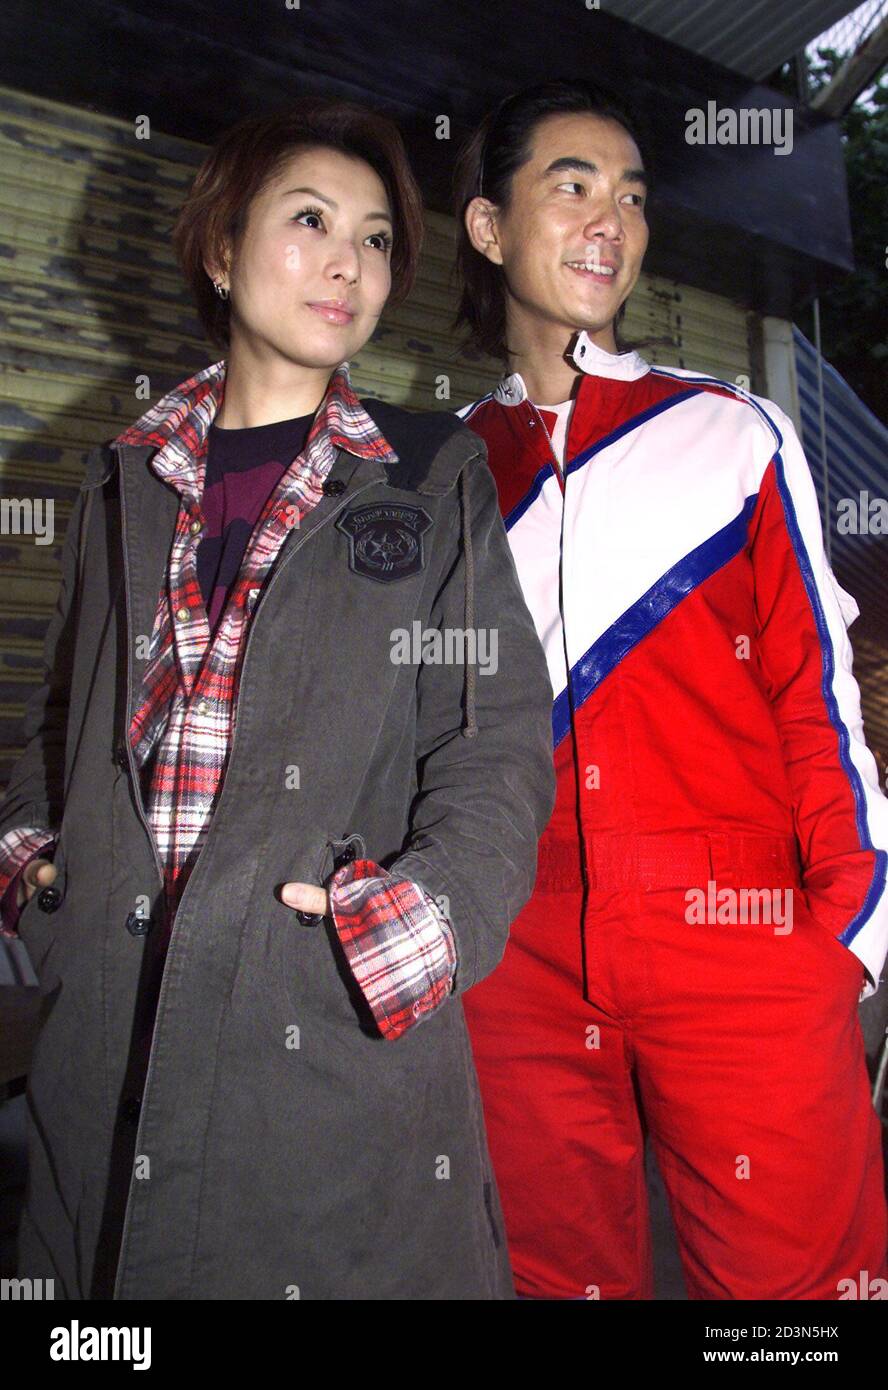 Hong Kong singer-actress Sammi Cheng (L) and Taiwanese singer-actor Richie Yum pose for photographers before shooting the romance film 'Marry a Rich Man' in Hong Kong December 18, 2001. The movie is due for release in January 2002. REUTERS/Kin Cheung  KC/RCS Stock Photo